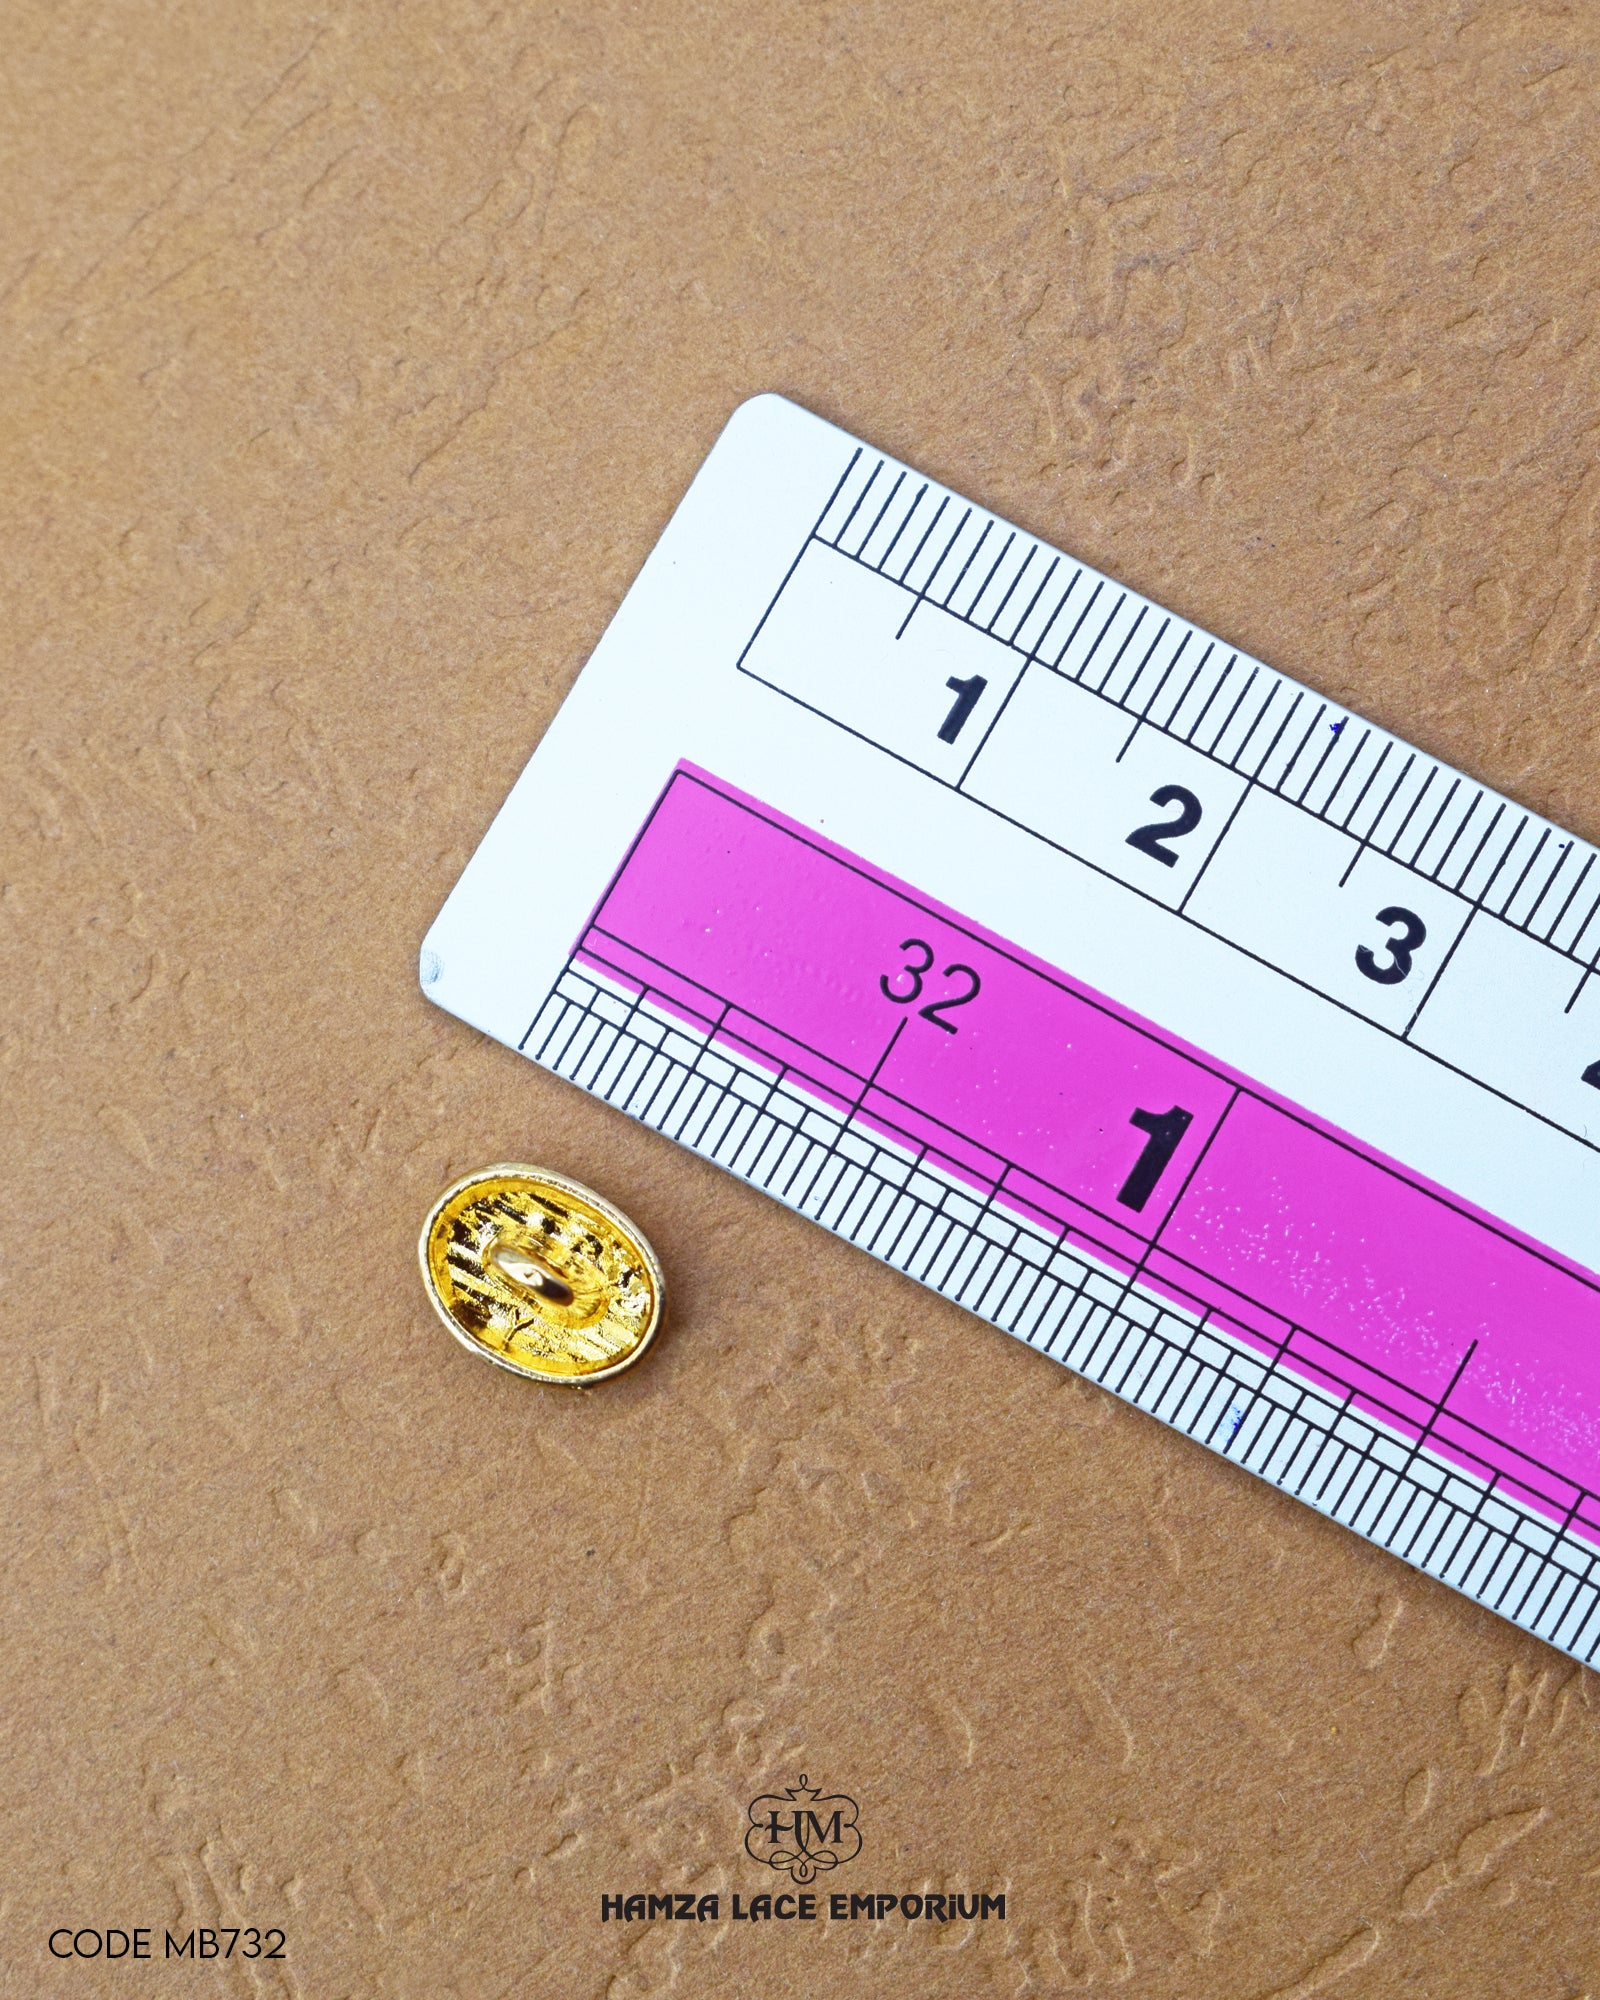 The size of the 'Golden Metal Button MB732' is measured using a ruler.